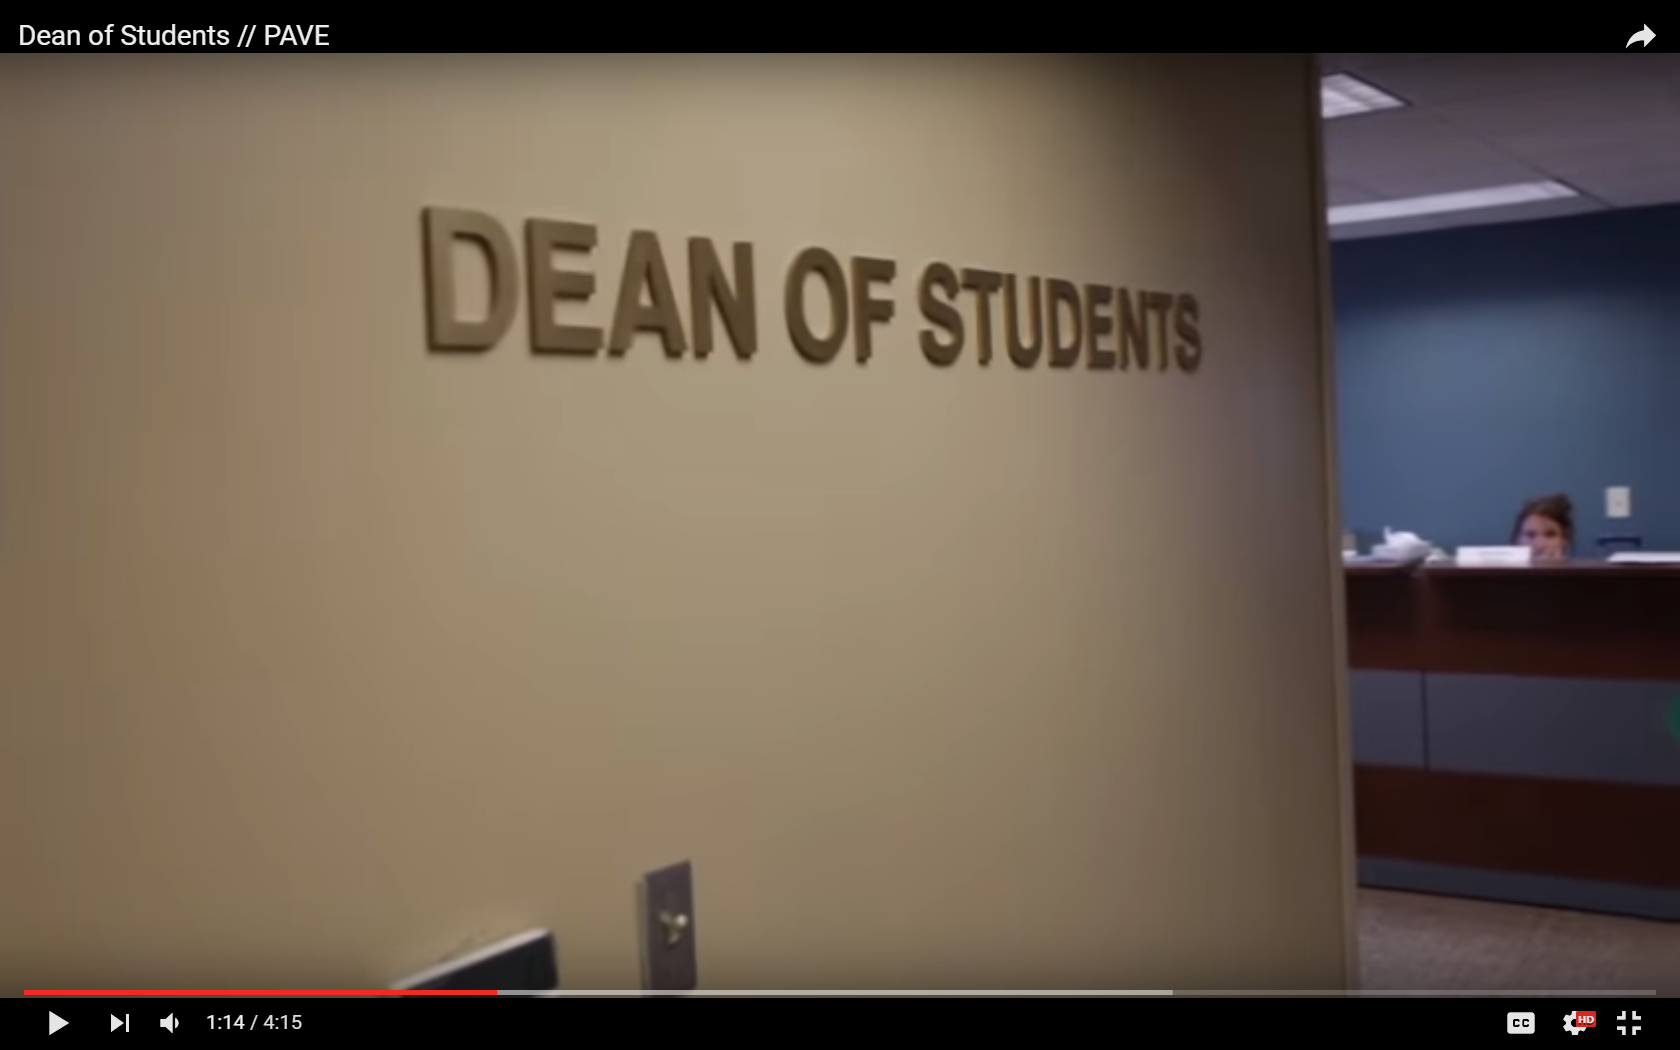 PAVE Dean of Students